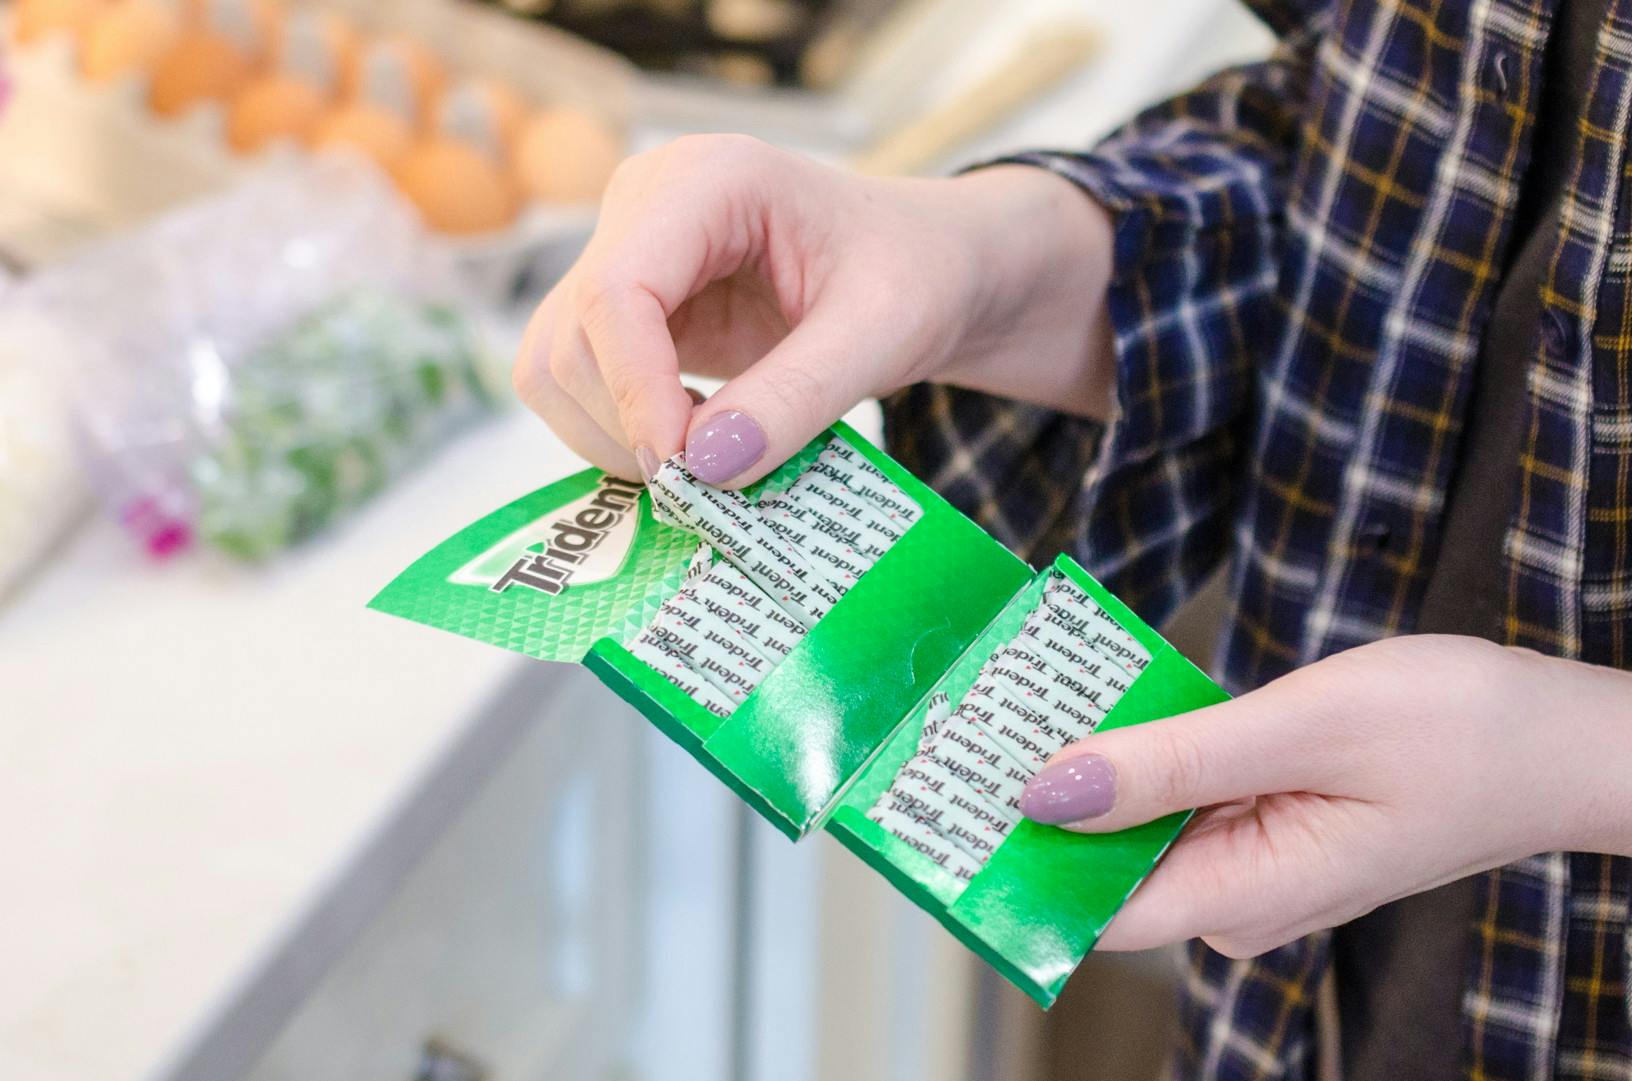 Chew sugarless gum while you grocery shop and cook.